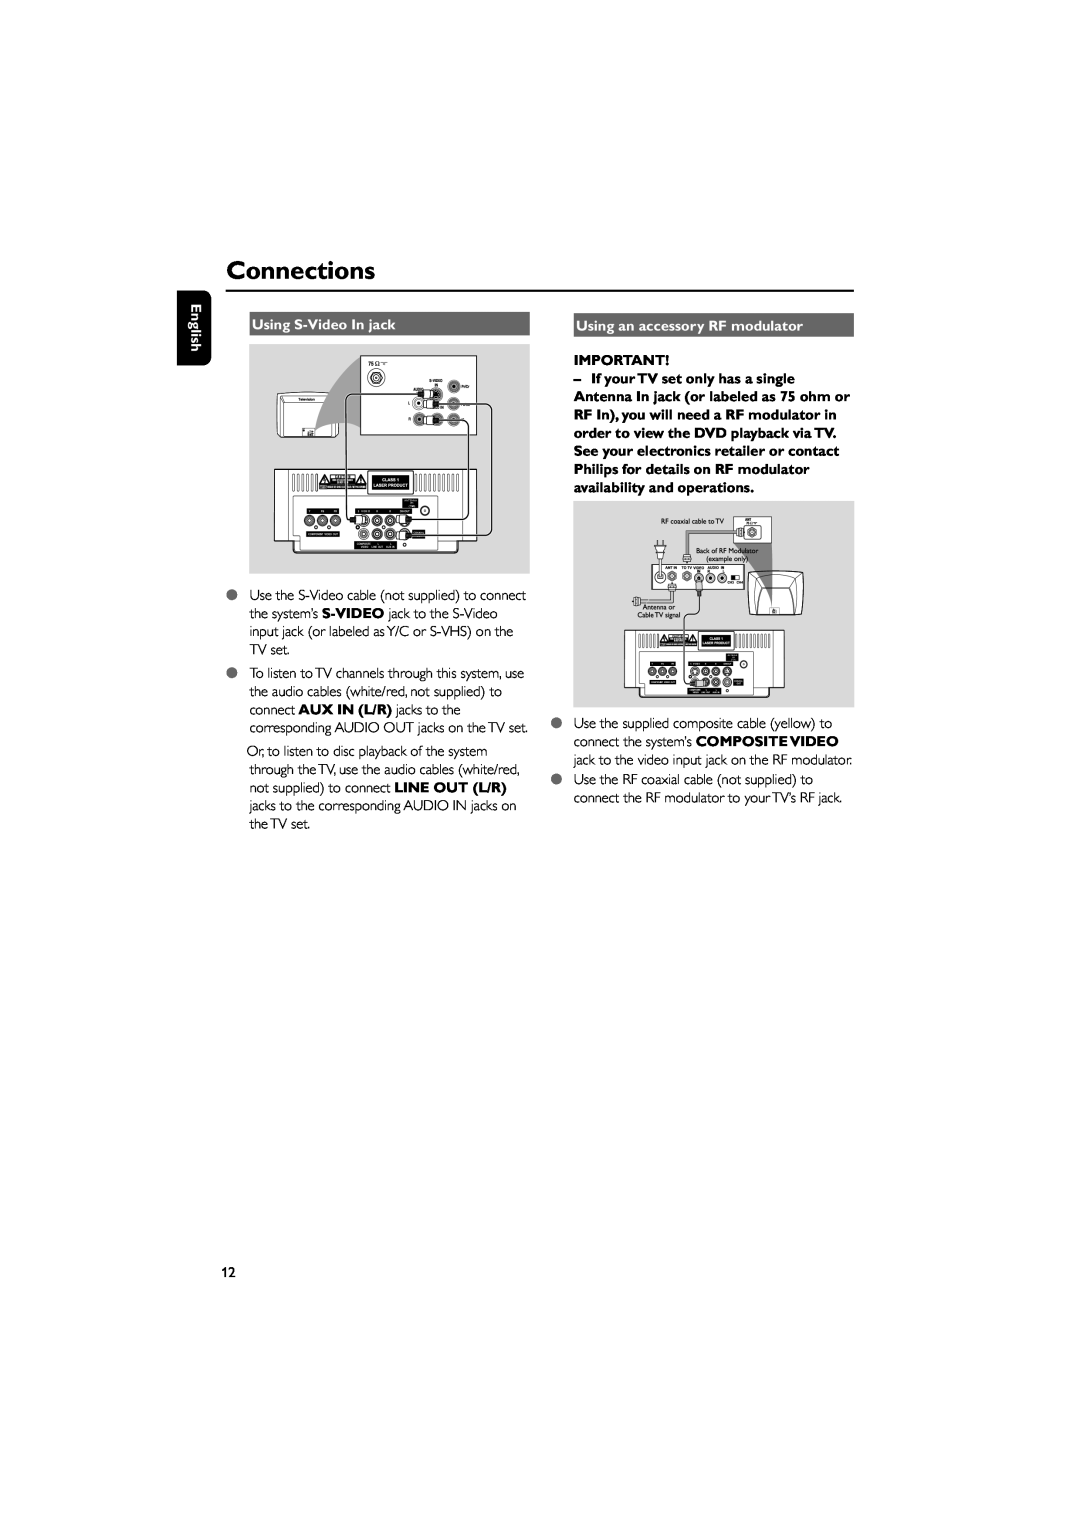 Philips MCD139 owner manual Connections, English, Using S-VideoIn jack, Using an accessory RF modulator 